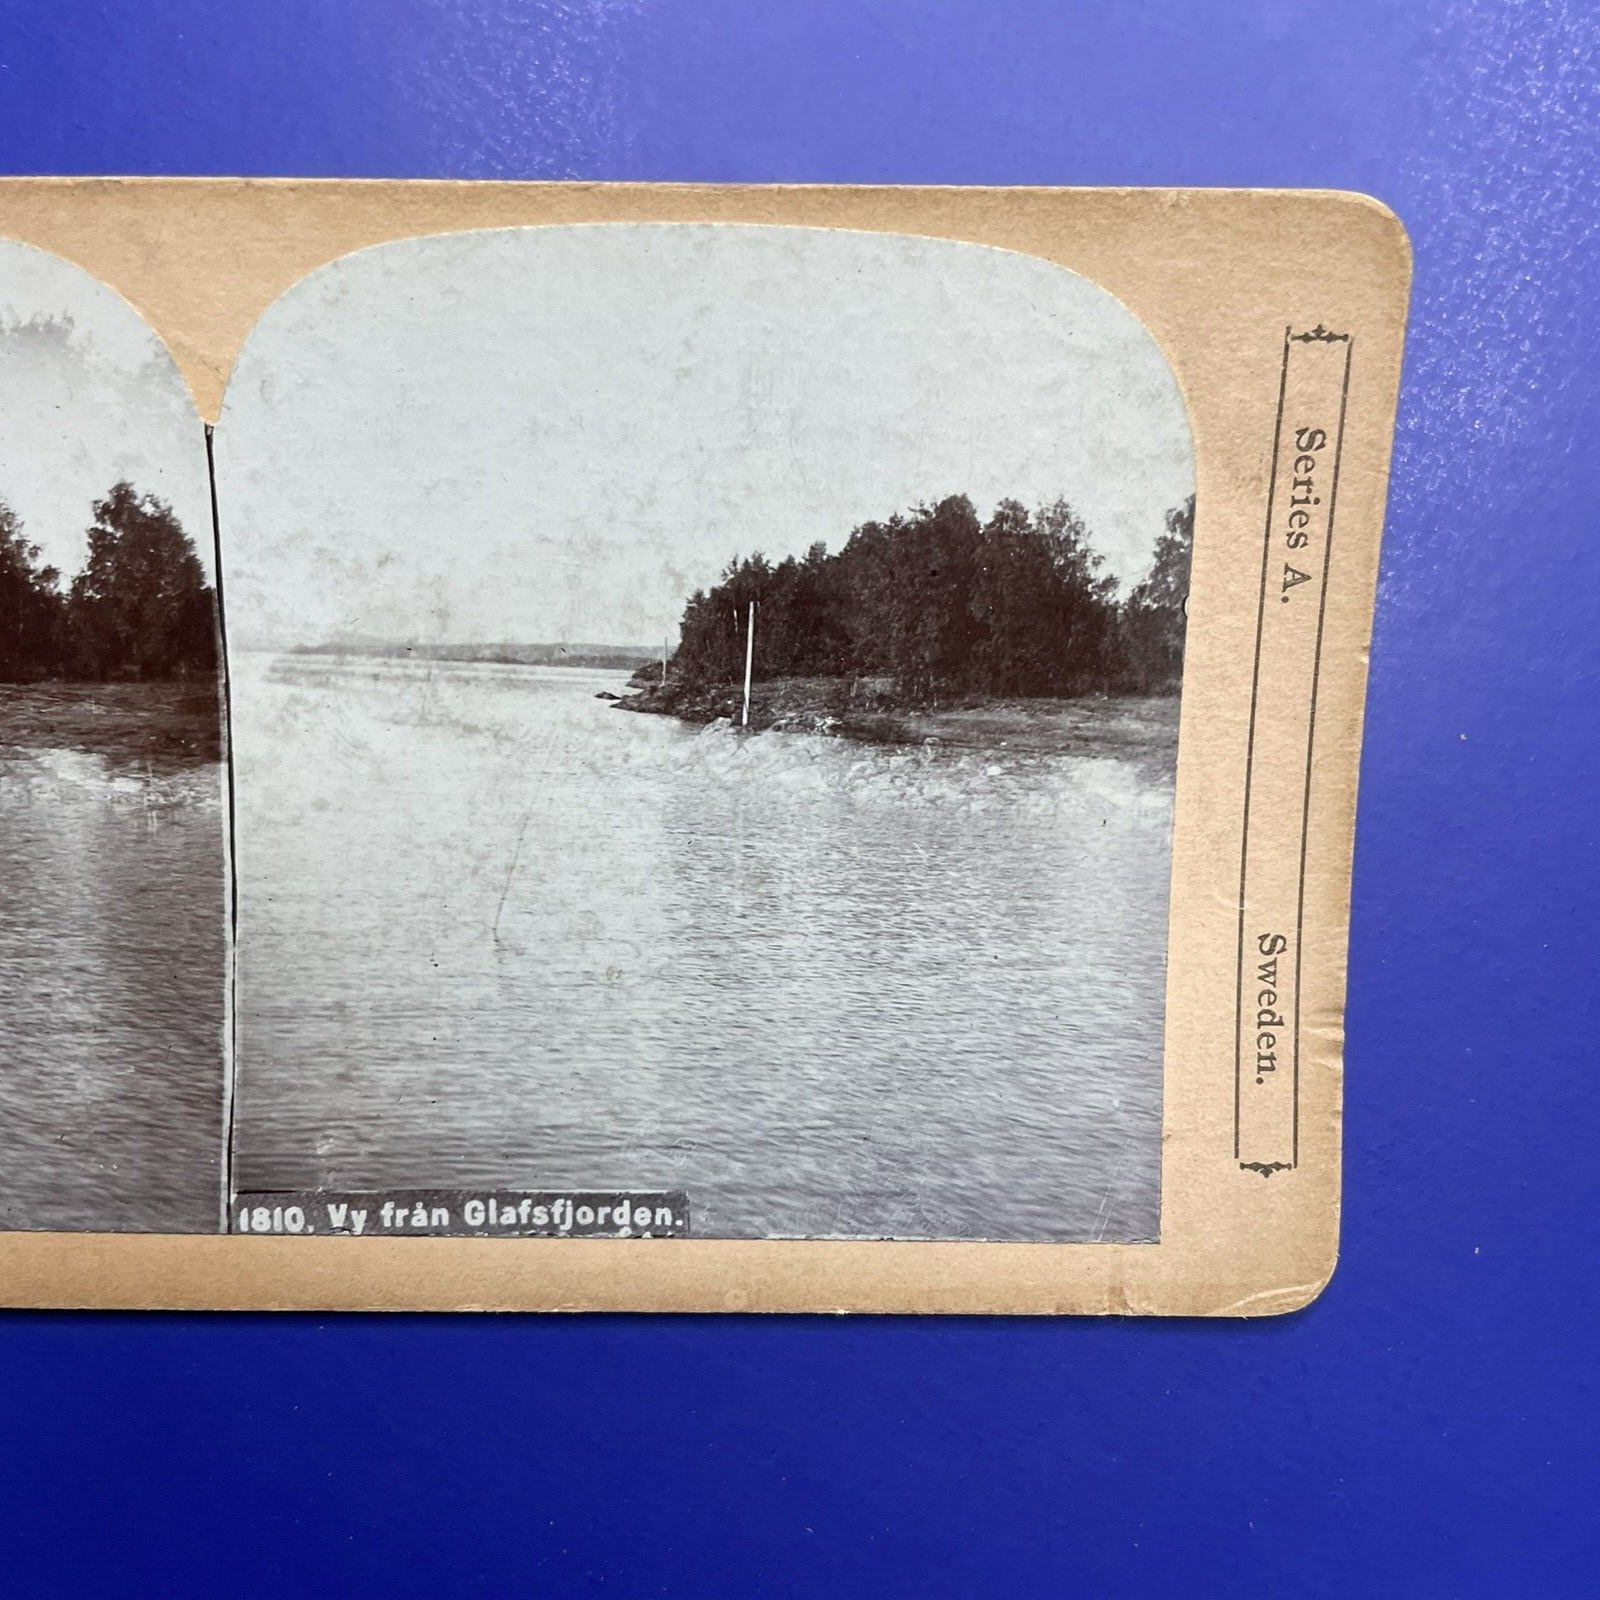 Antique Stereoview Card Gust A Johnson Sweden Water Lake Vy Fran Glafsfjorden